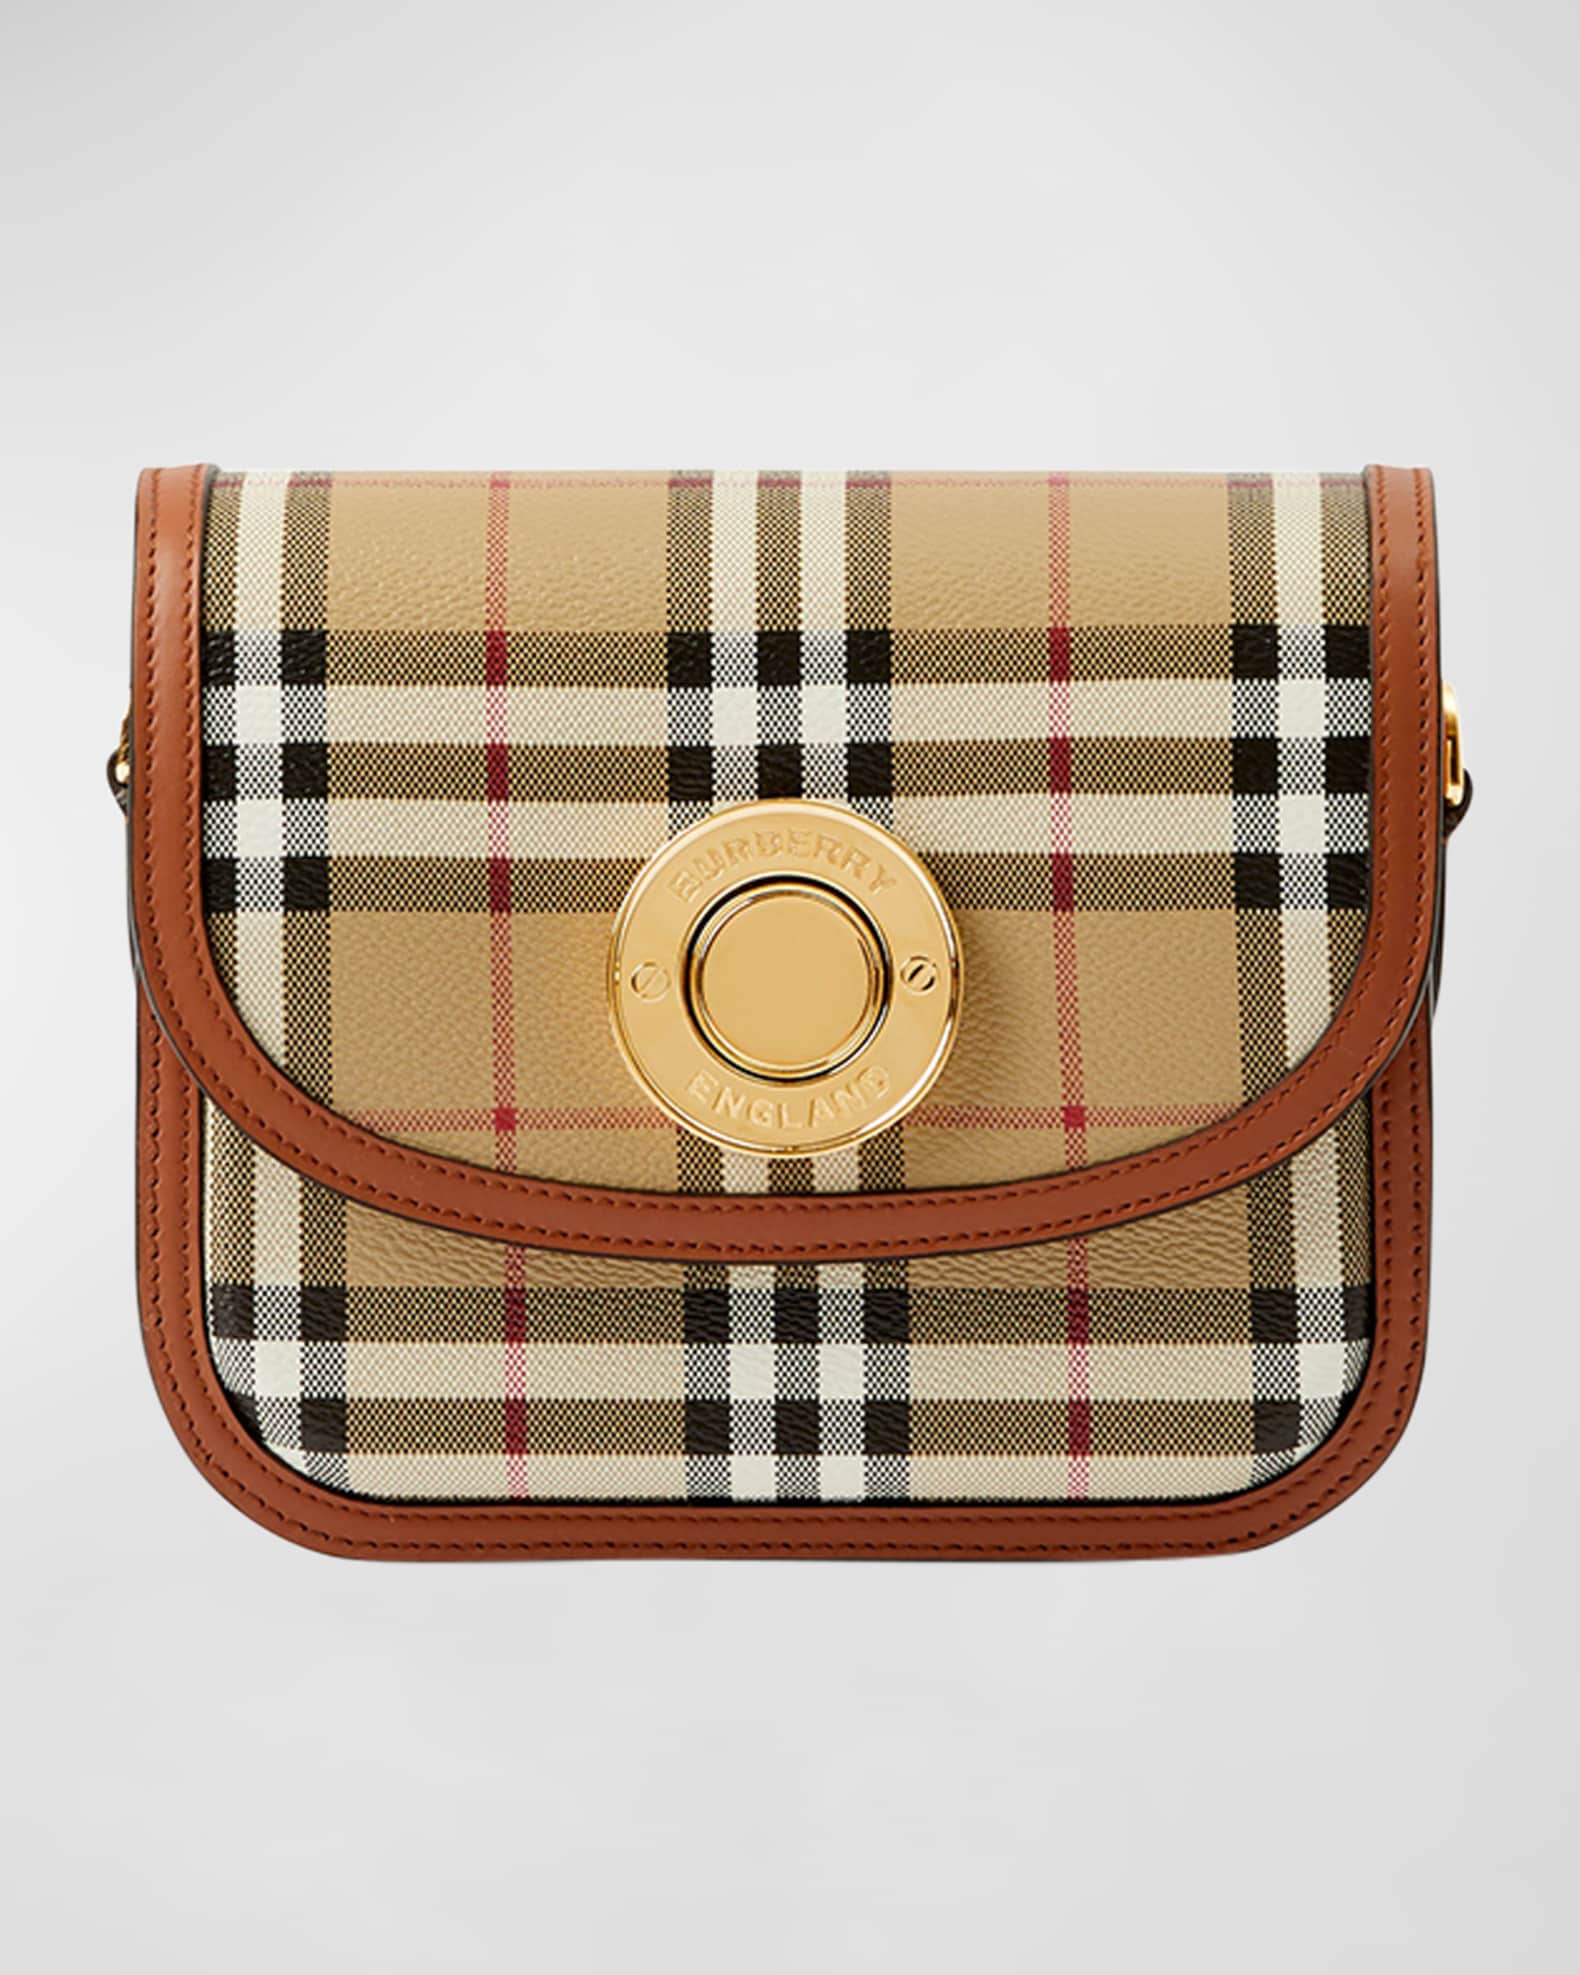 Luxury Investment: Why Are Burberry Bags So Expensive?